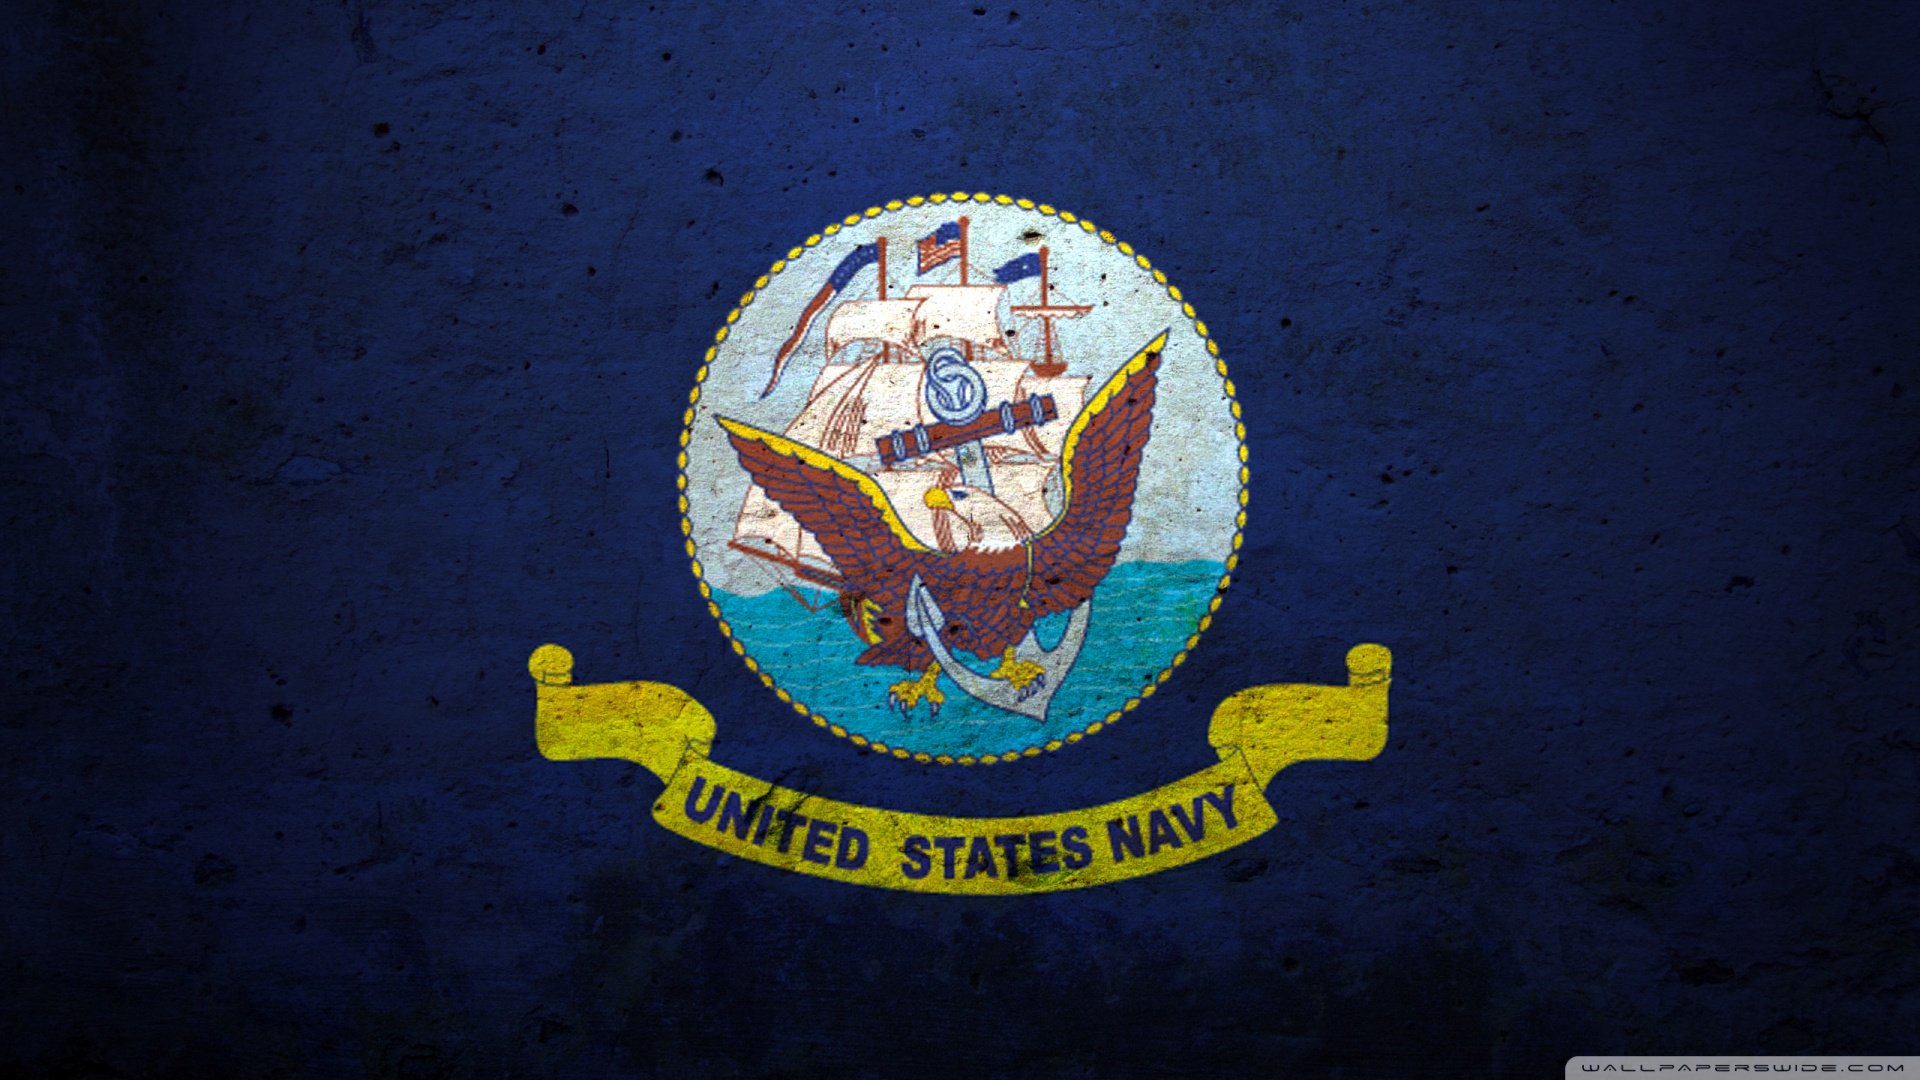  United States Navy Wallpaper 1920x1080 Flag Of The United States 1920x1080